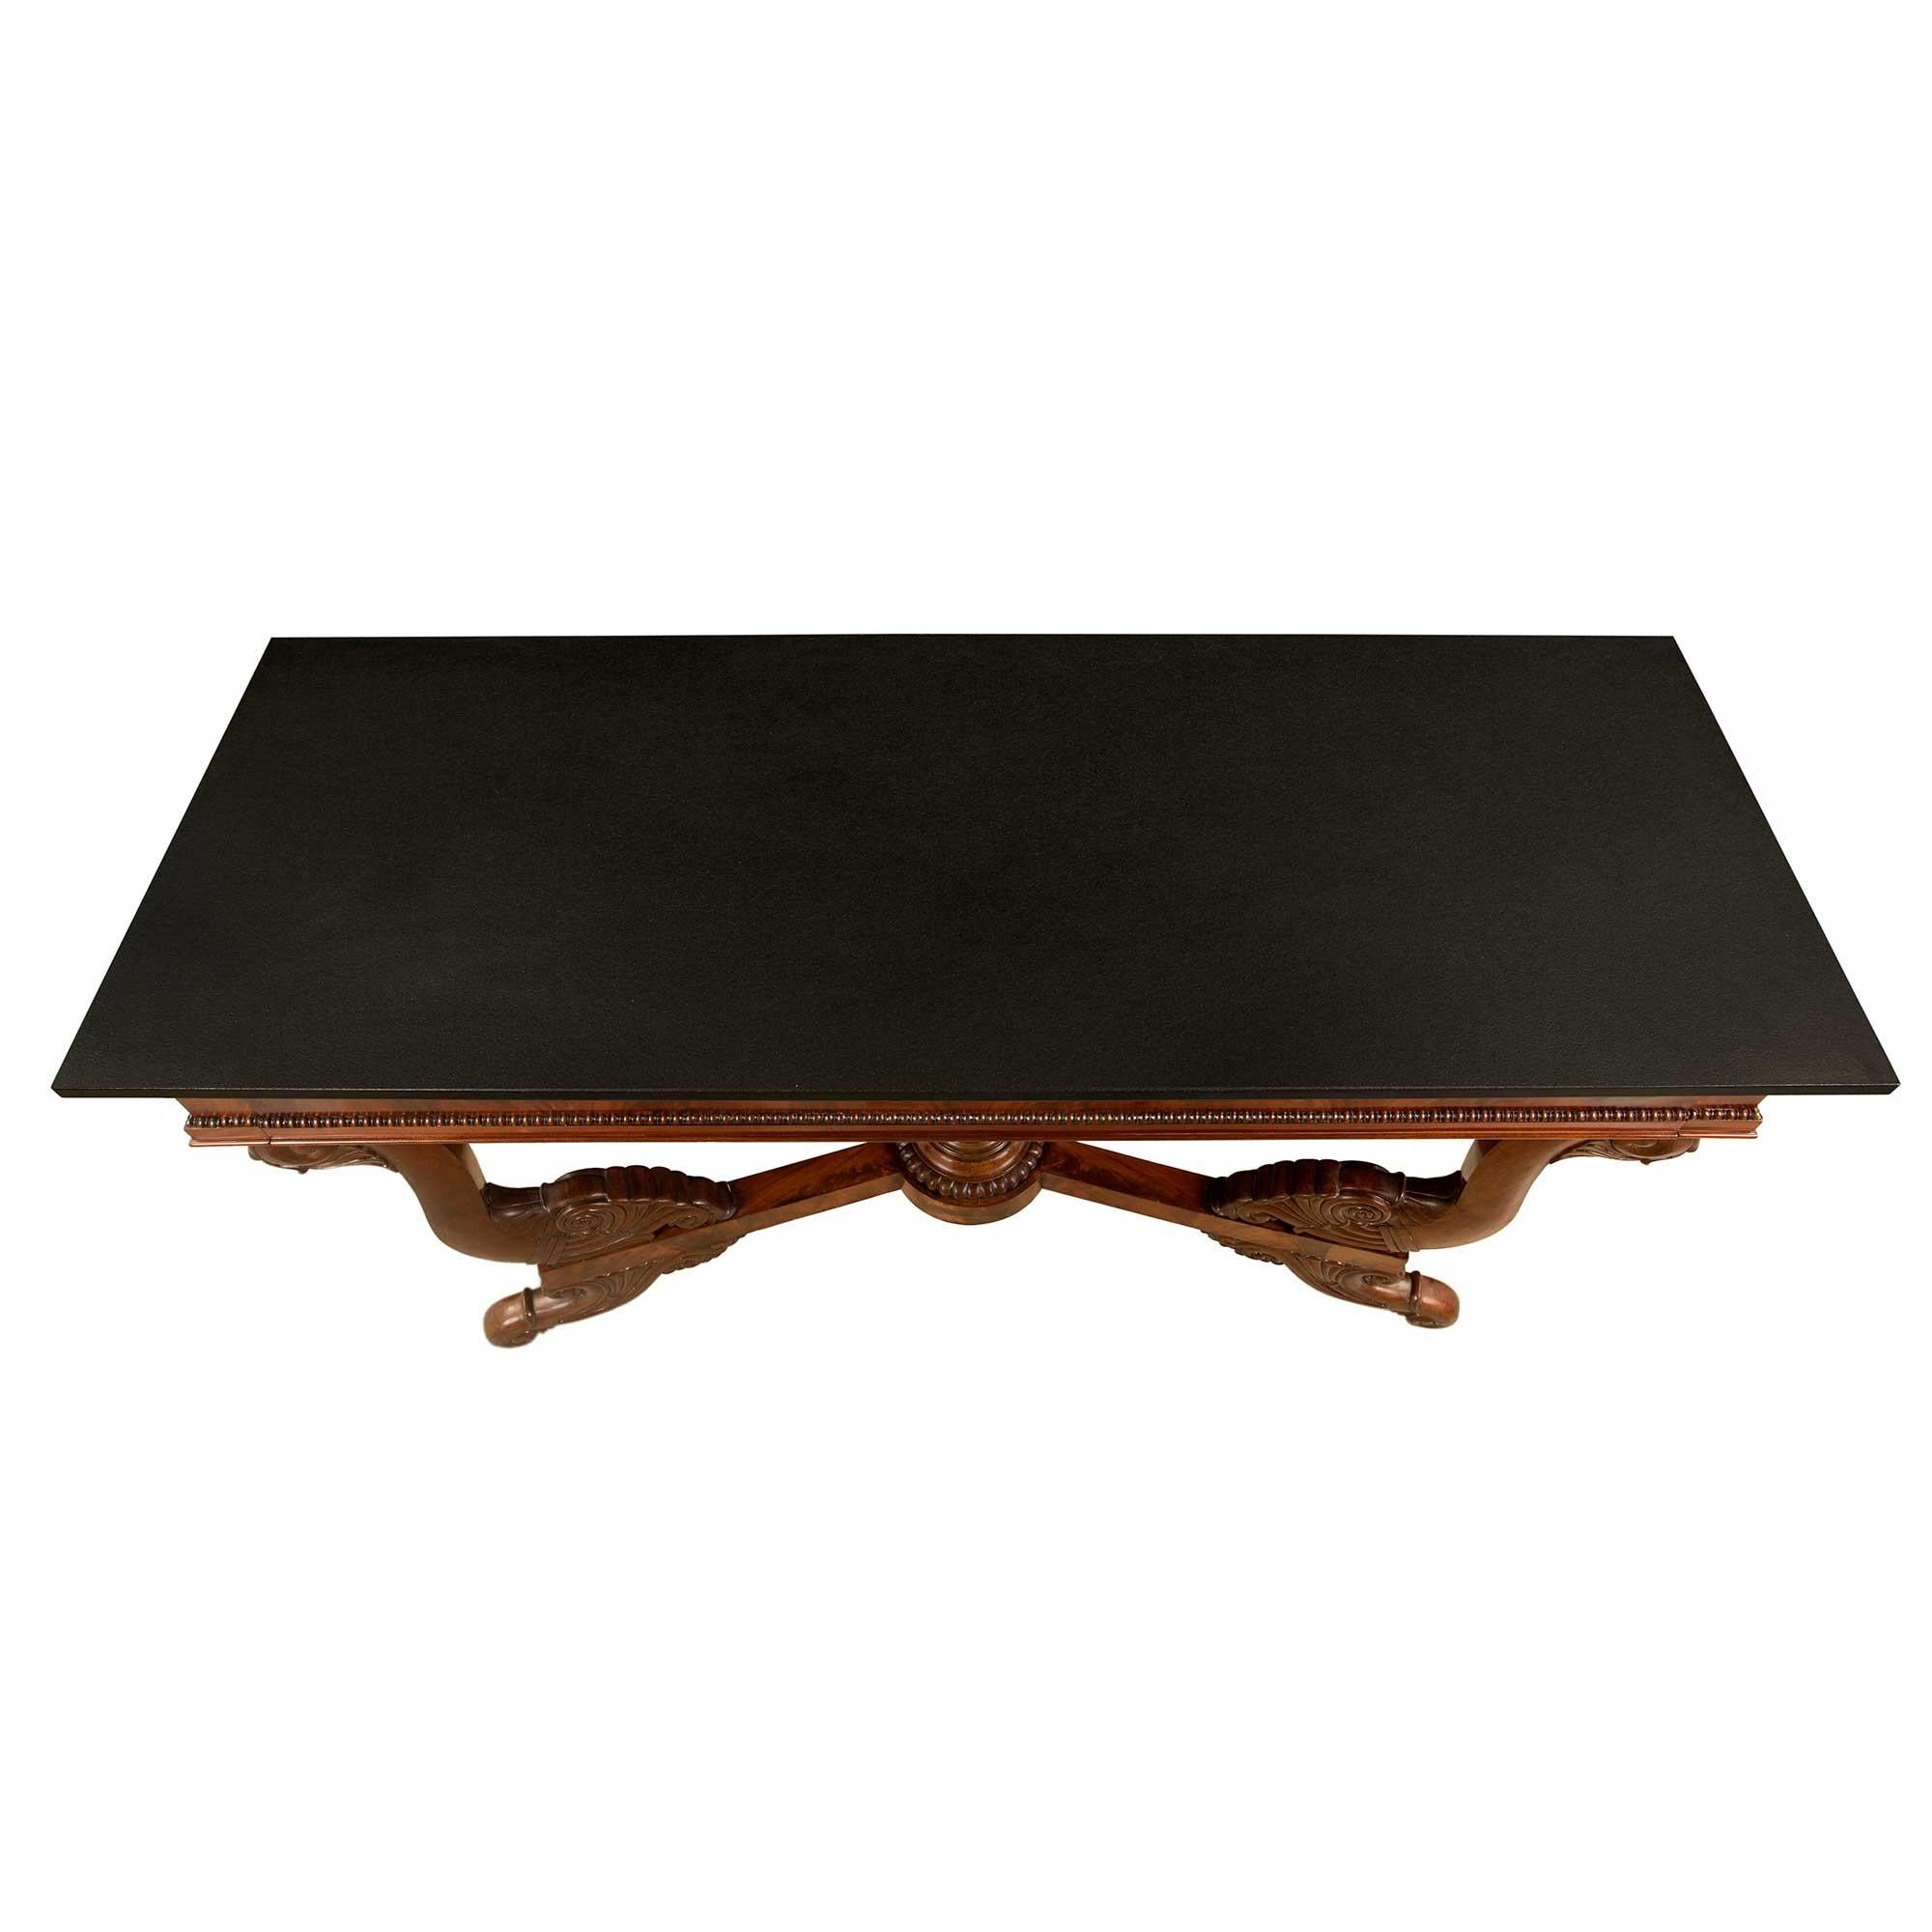 A very handsome French 19th century Louis Philippe st. flamed mahogany and black stone freestanding console. The console is raised by elegant scrolled supports with fine foliate designs. Each elegant scrolled leg displays richly carved foliate